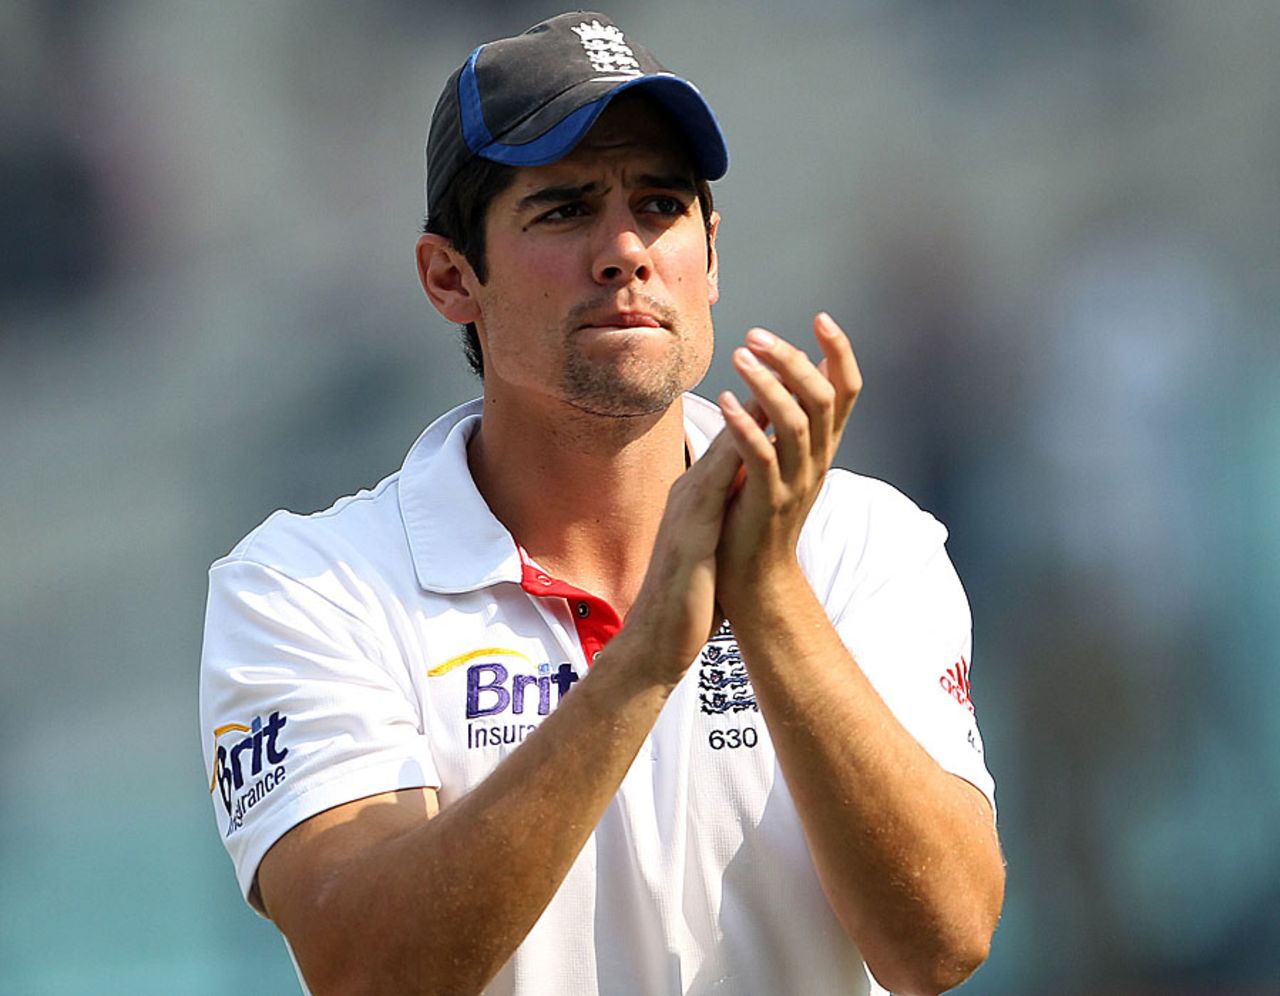 Alastair Cook acknowledges the crowd after England's win, India v England, 3rd Test, Kolkata, 5th day, December 8, 2012